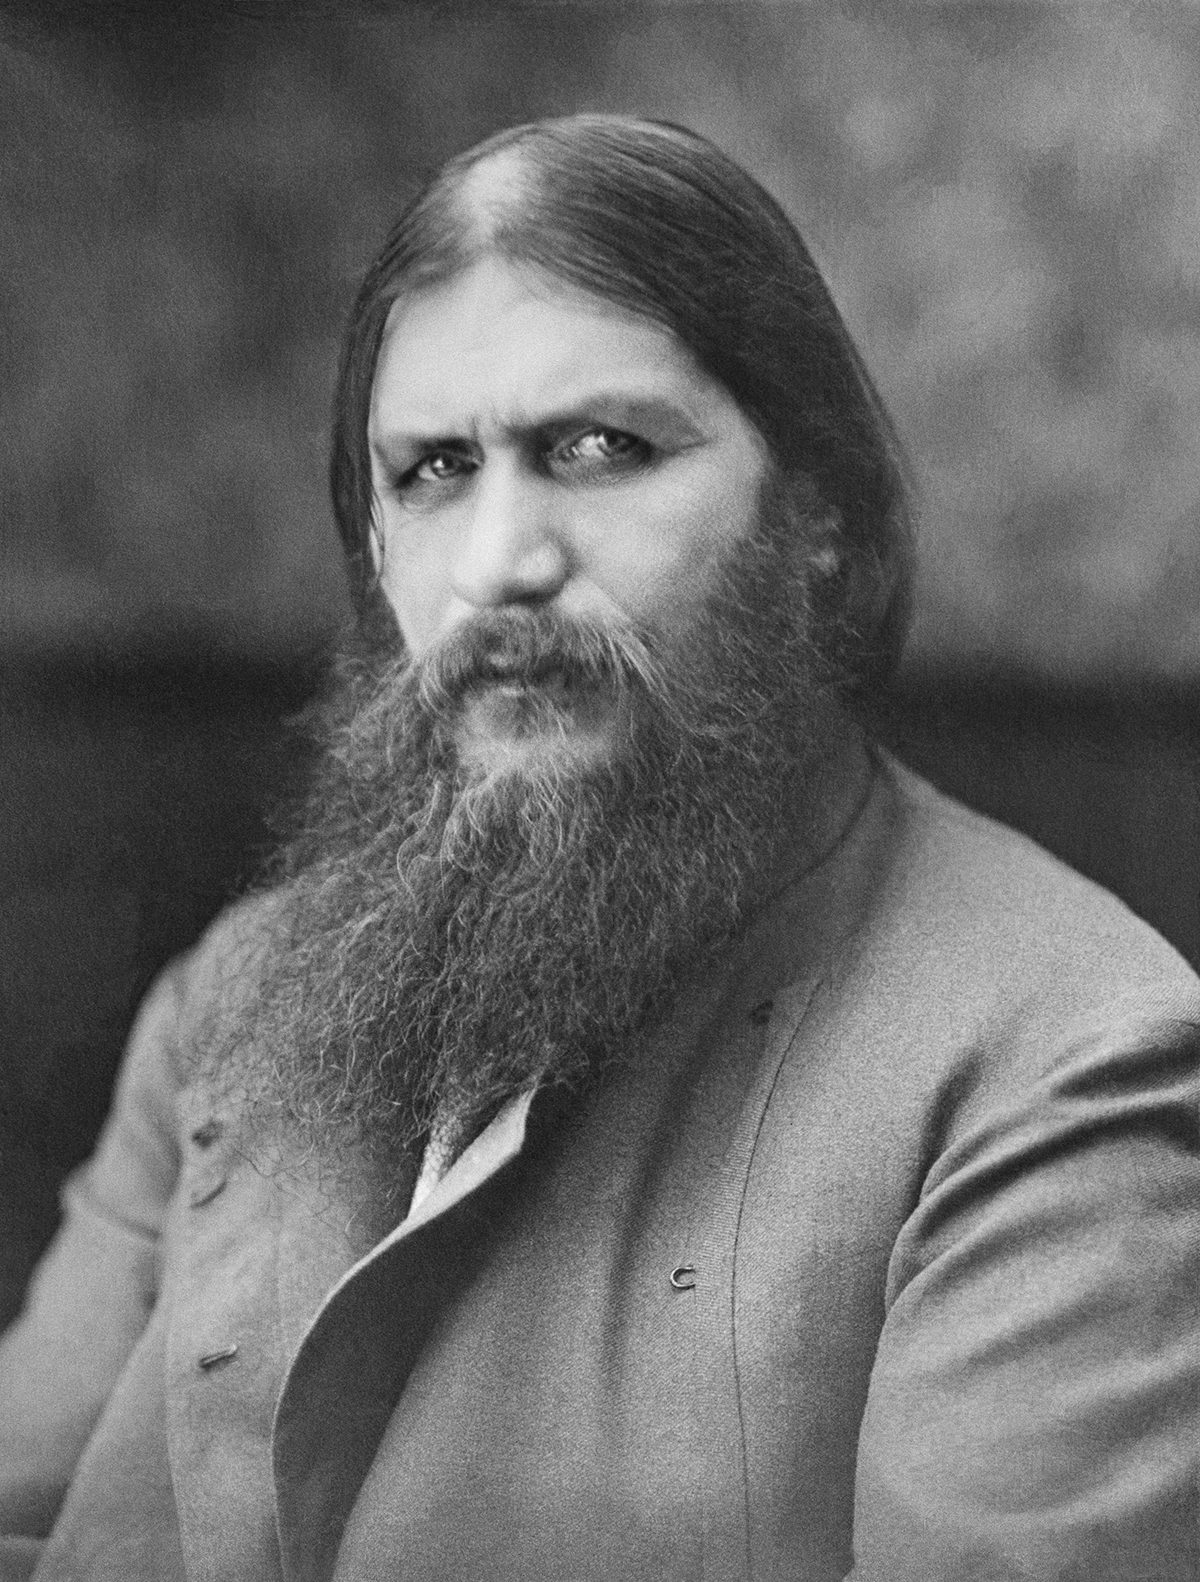 A portrait of Grigori Rasputin. He is looking into the camera. He has dark circles under his eyes and a long beard. He is wearing a simple gray jacket.